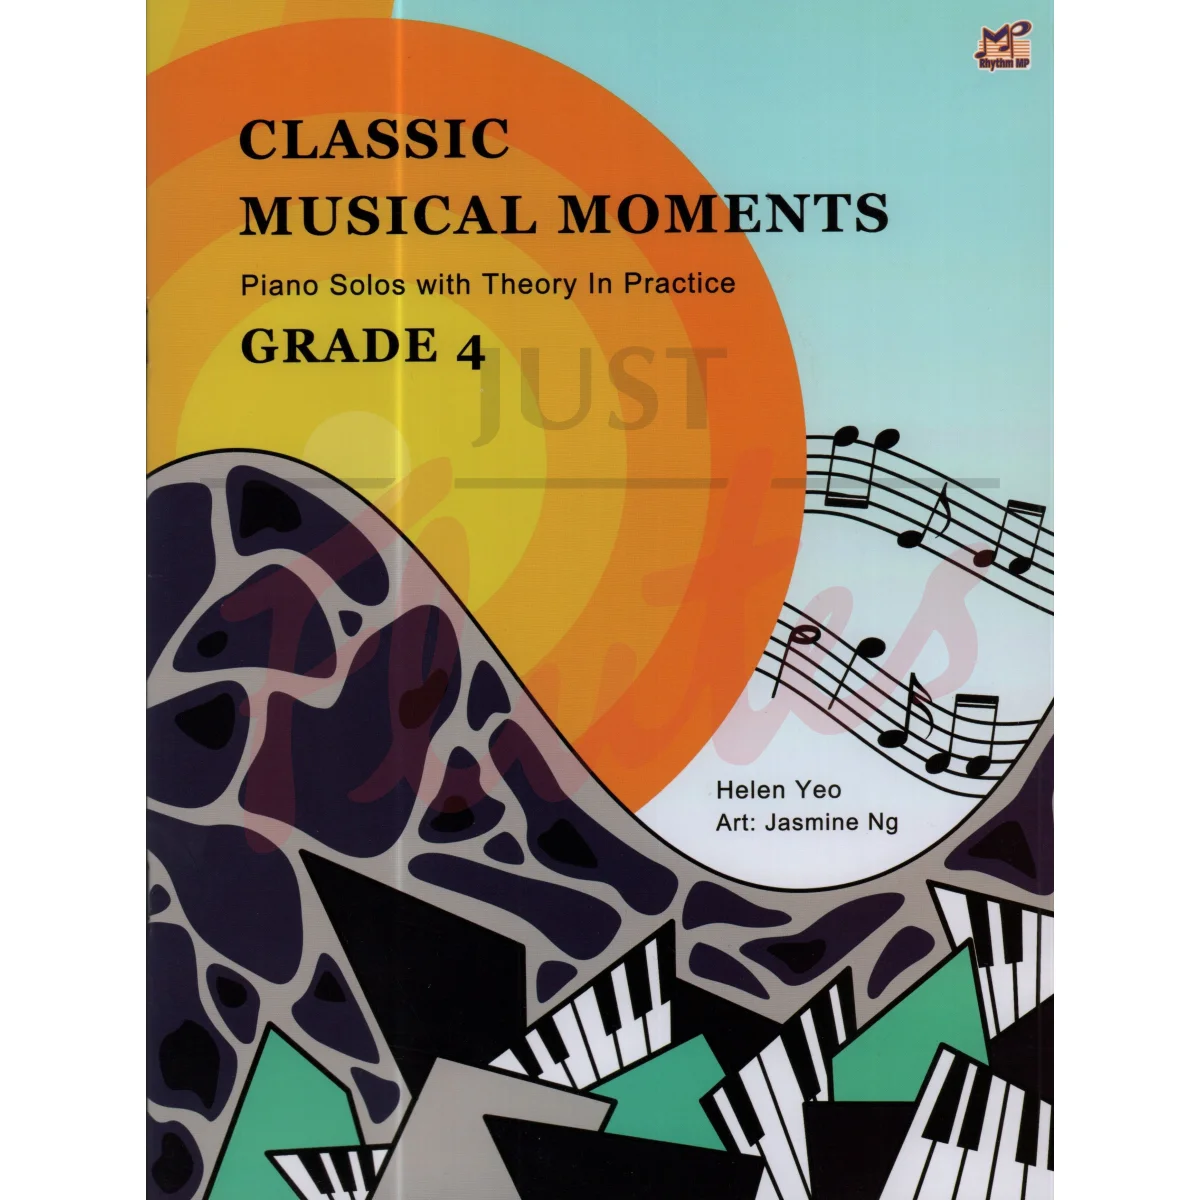 Classic Musical Moments Grade 4